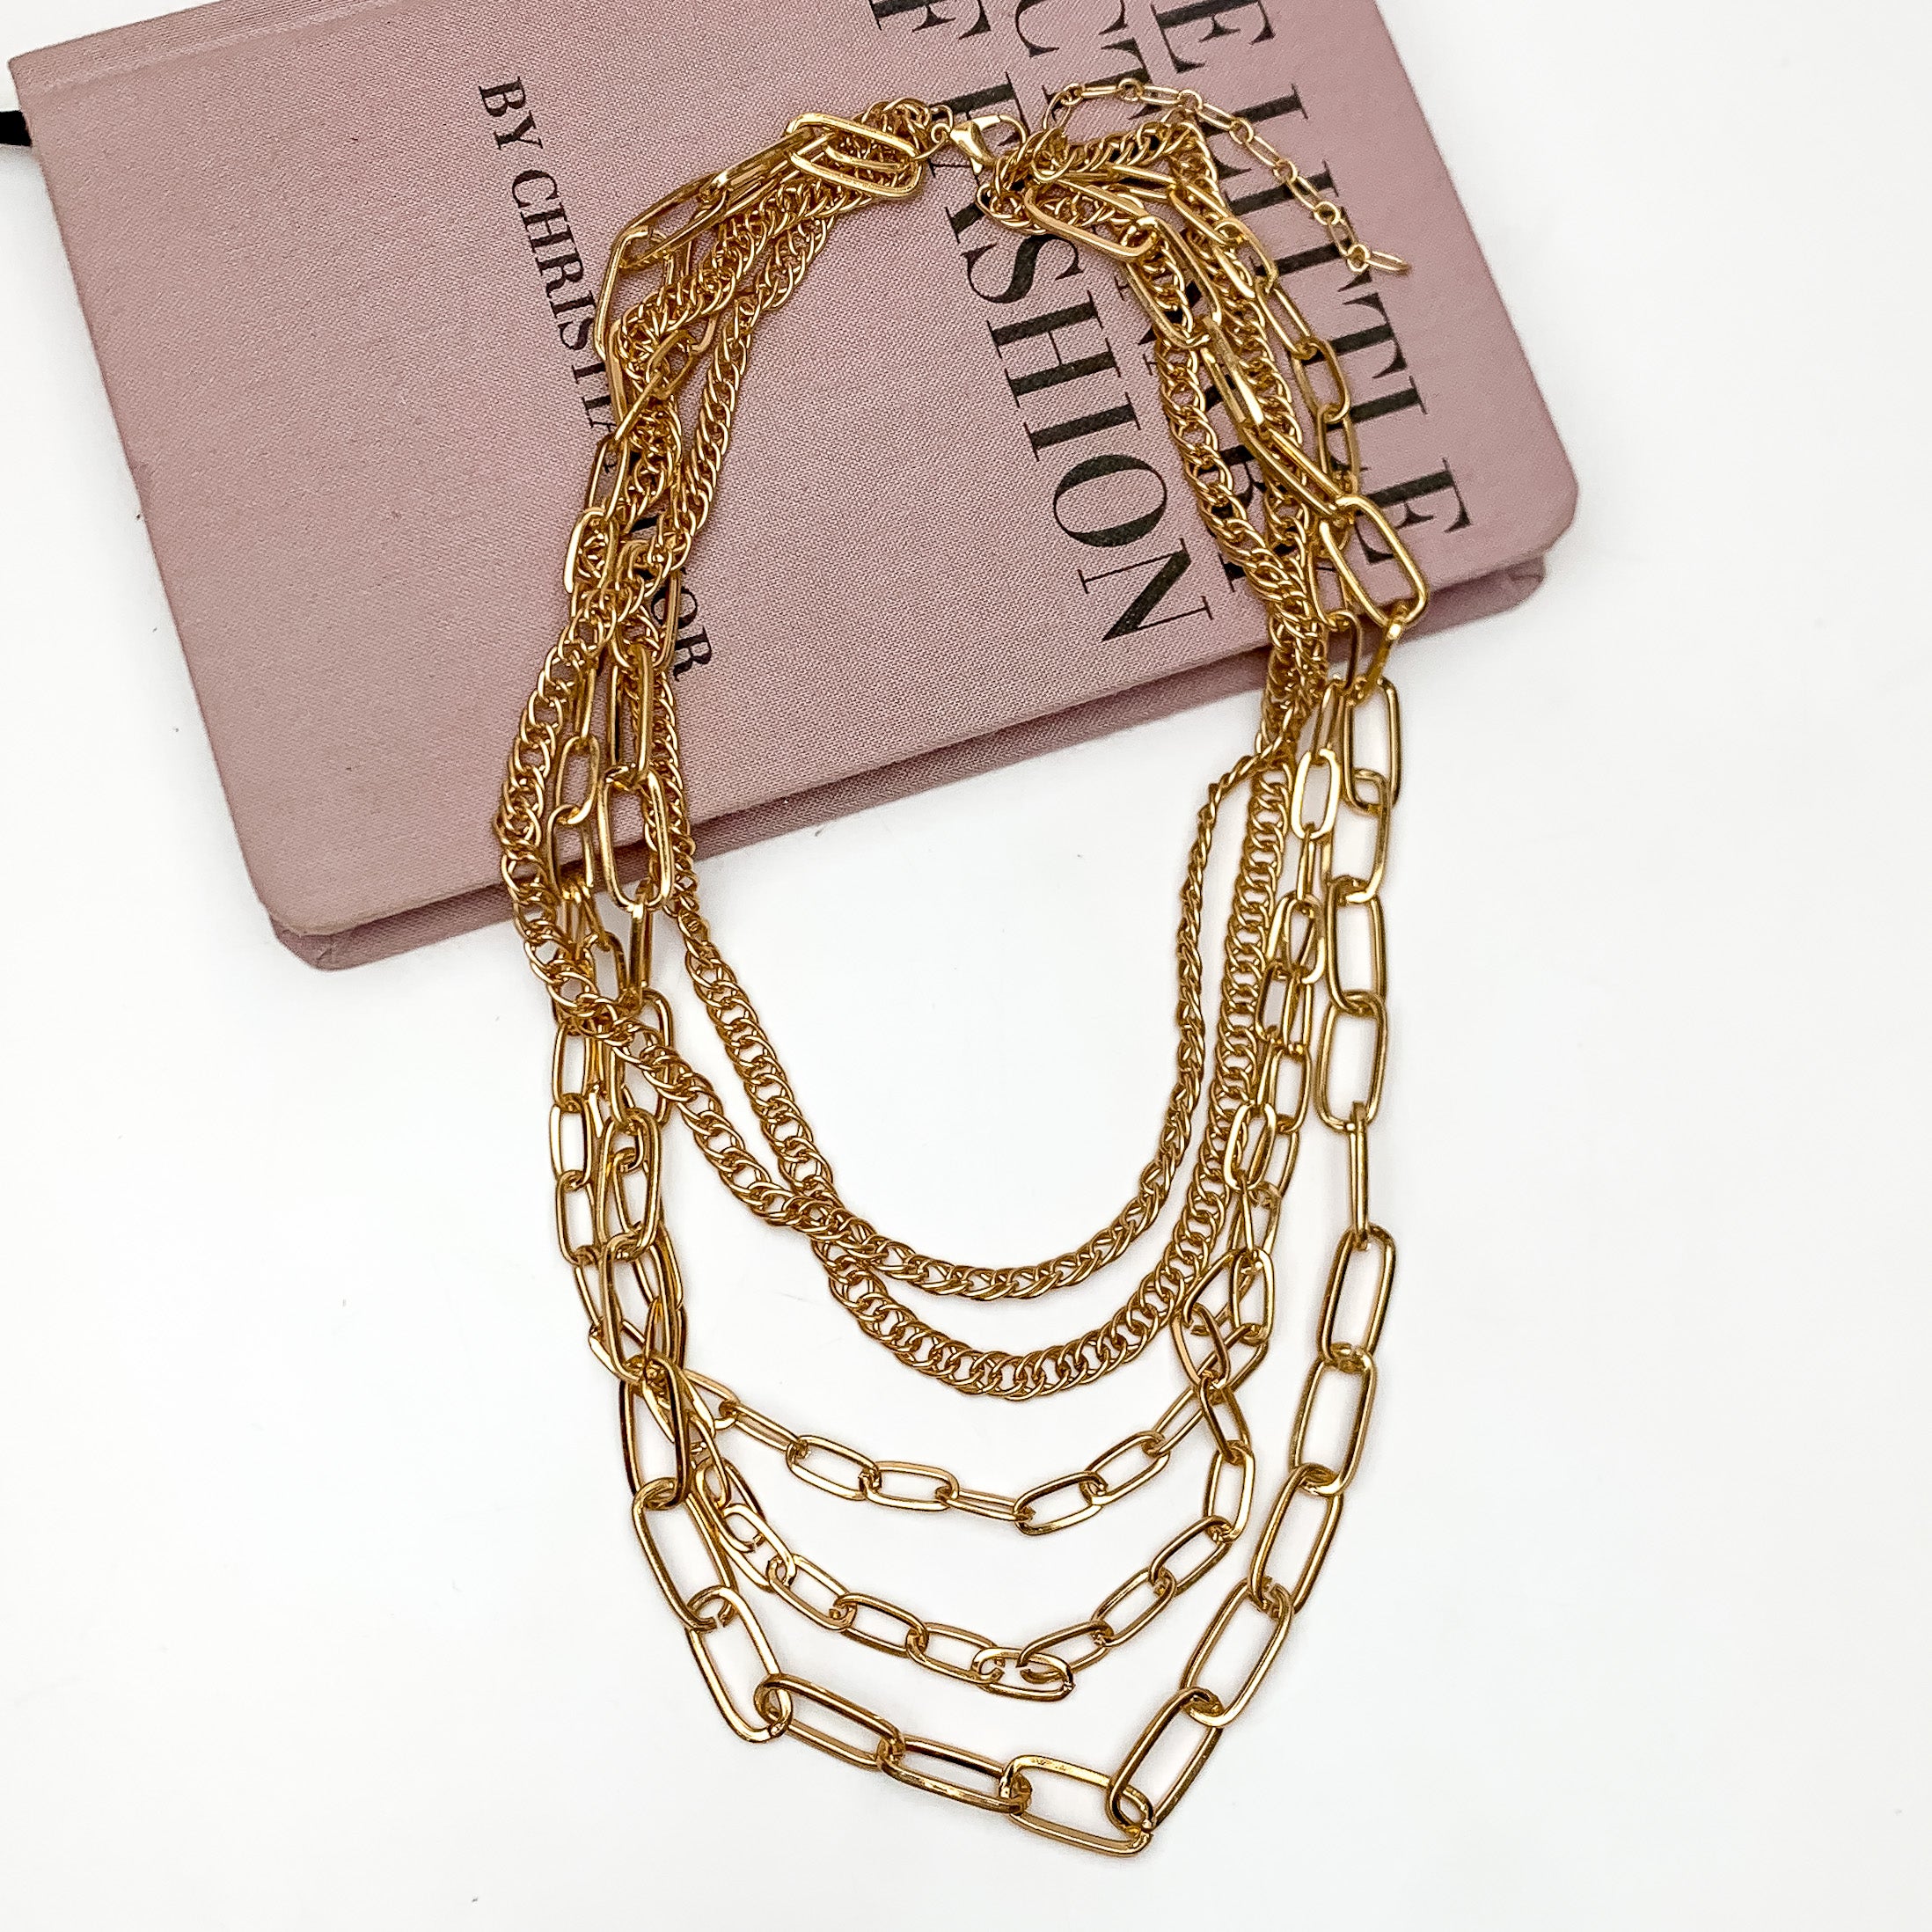 Forever Chic Multi Strand Chain Necklace in Gold Tone - Giddy Up Glamour Boutique